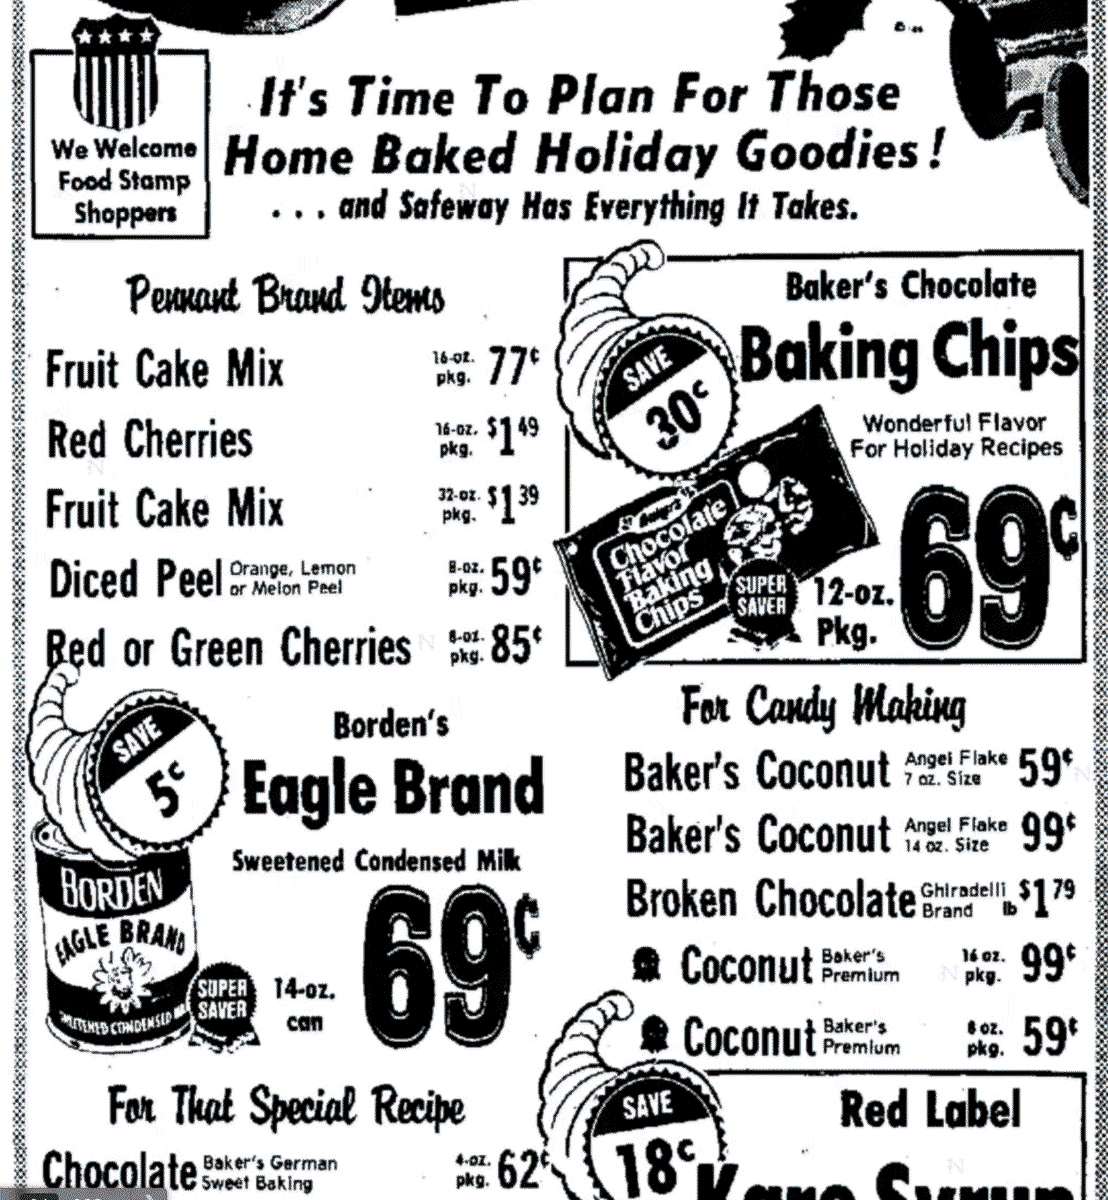 Baker’s 1976 prices